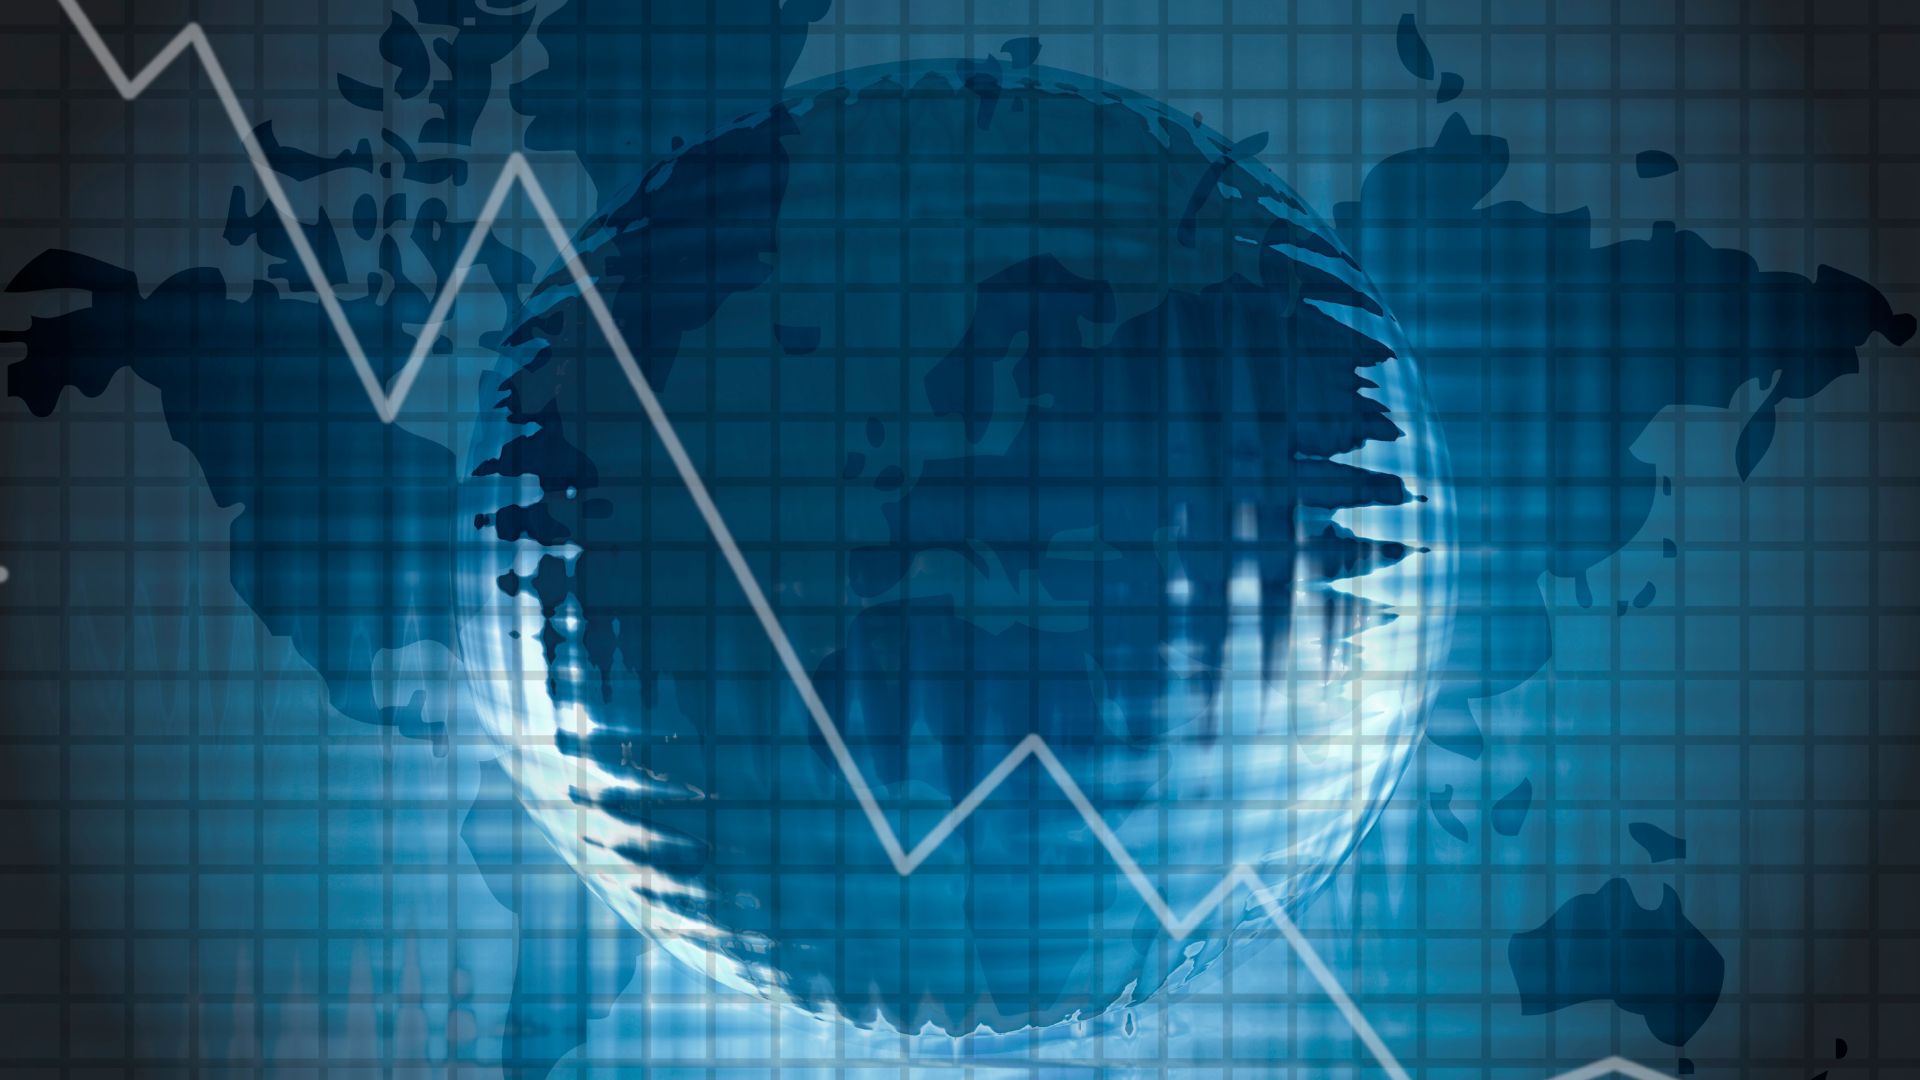 Continued fears of global recession subdue markets